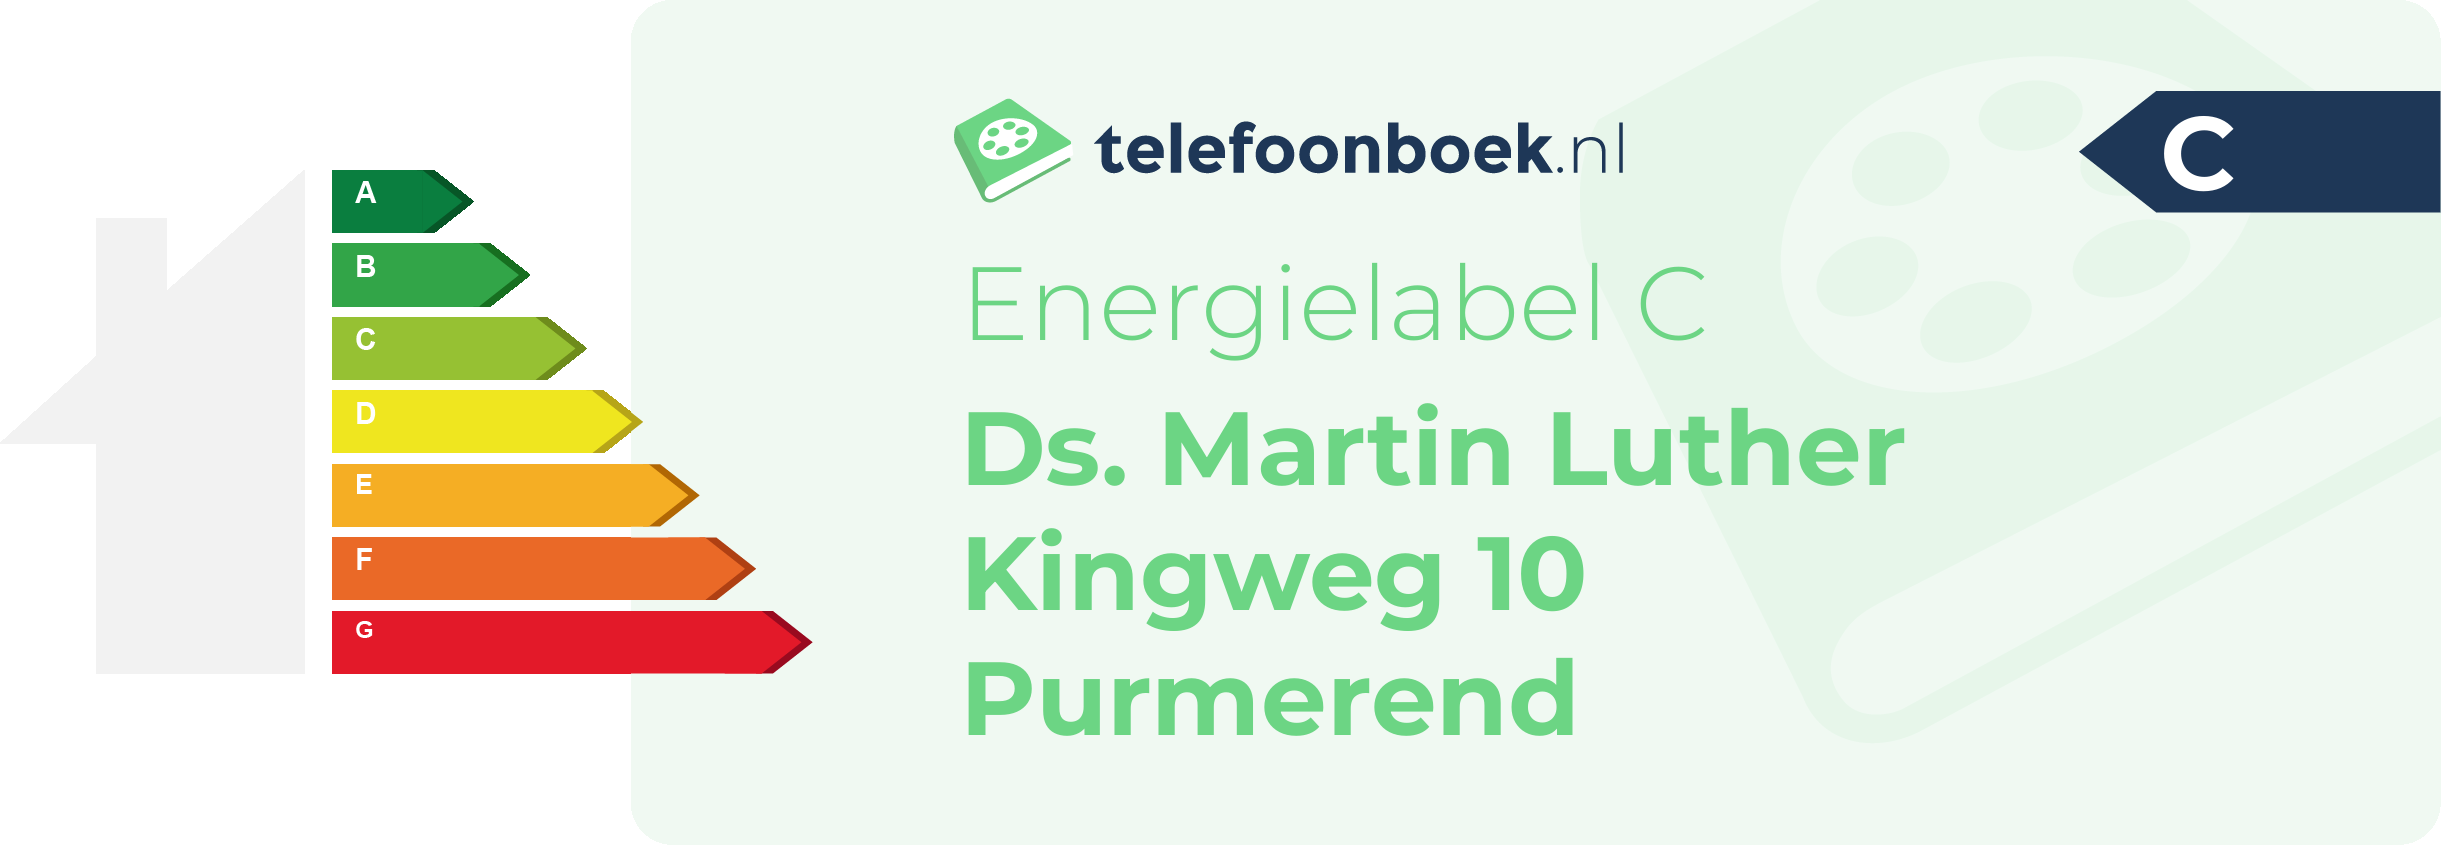 Energielabel Ds. Martin Luther Kingweg 10 Purmerend